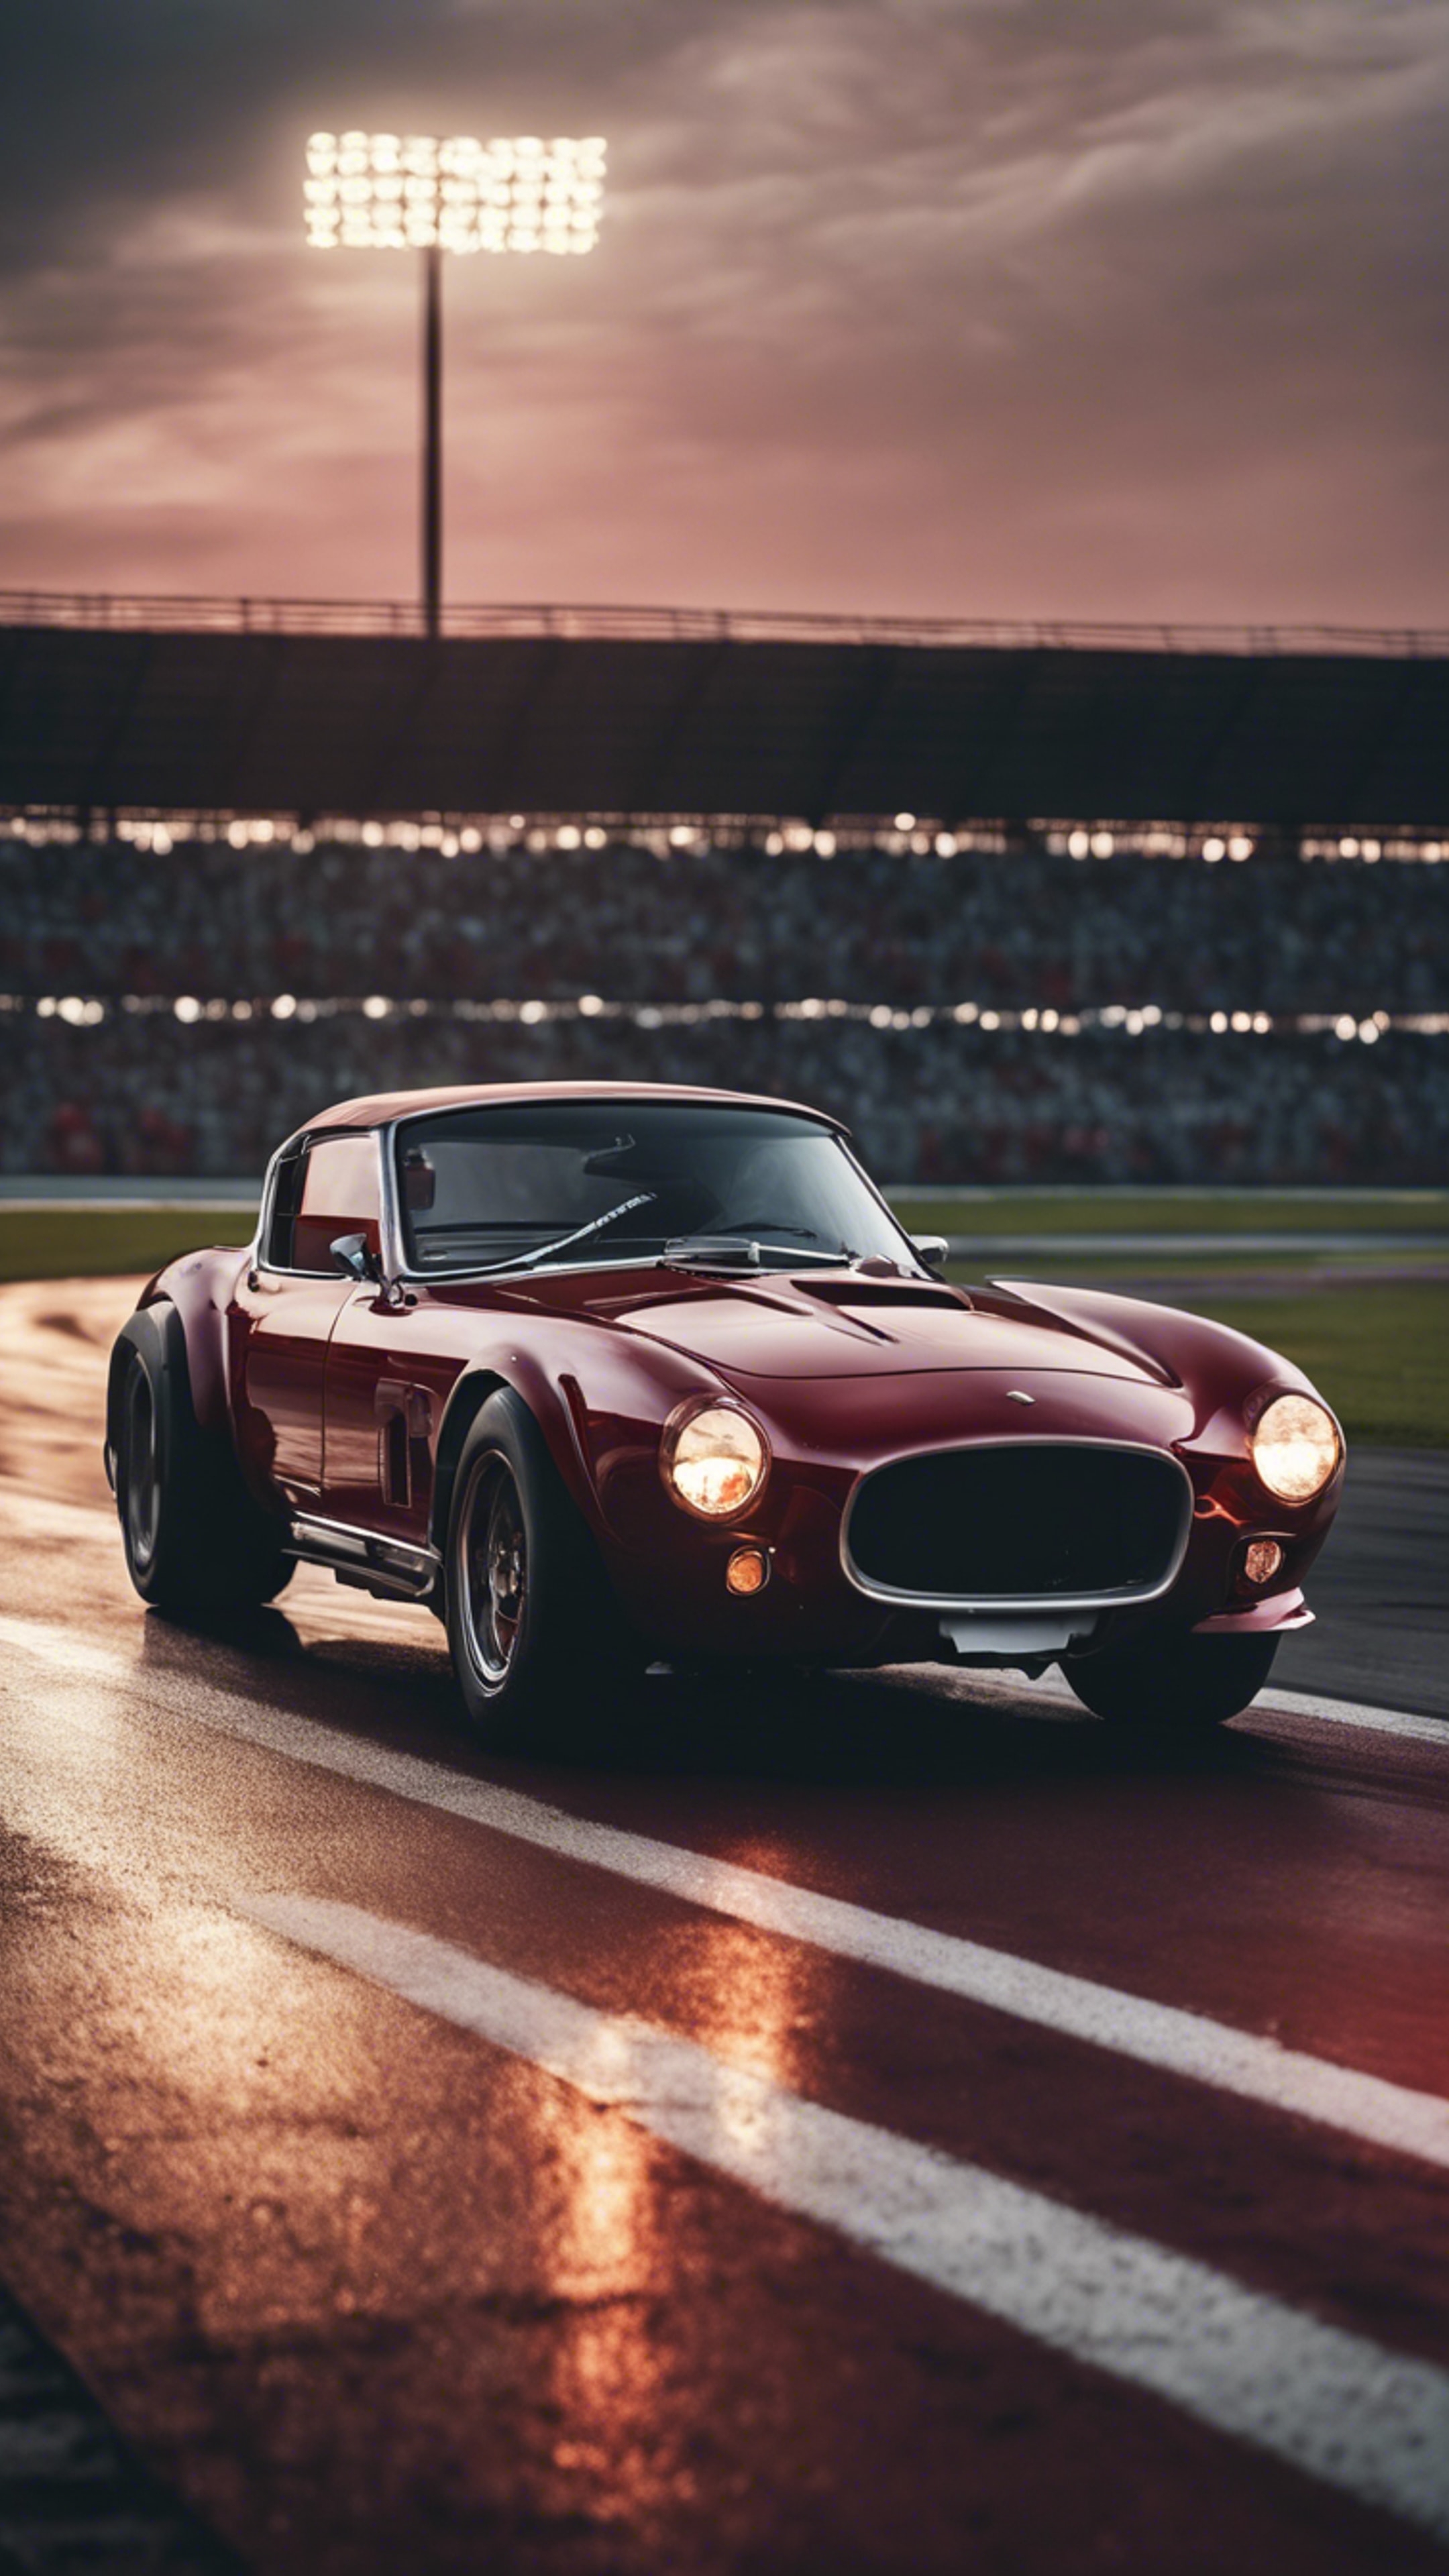 A richly toned dark red sports car racing on a track under the evening sky. Hintergrund[f7c86e5103c94fca80ae]